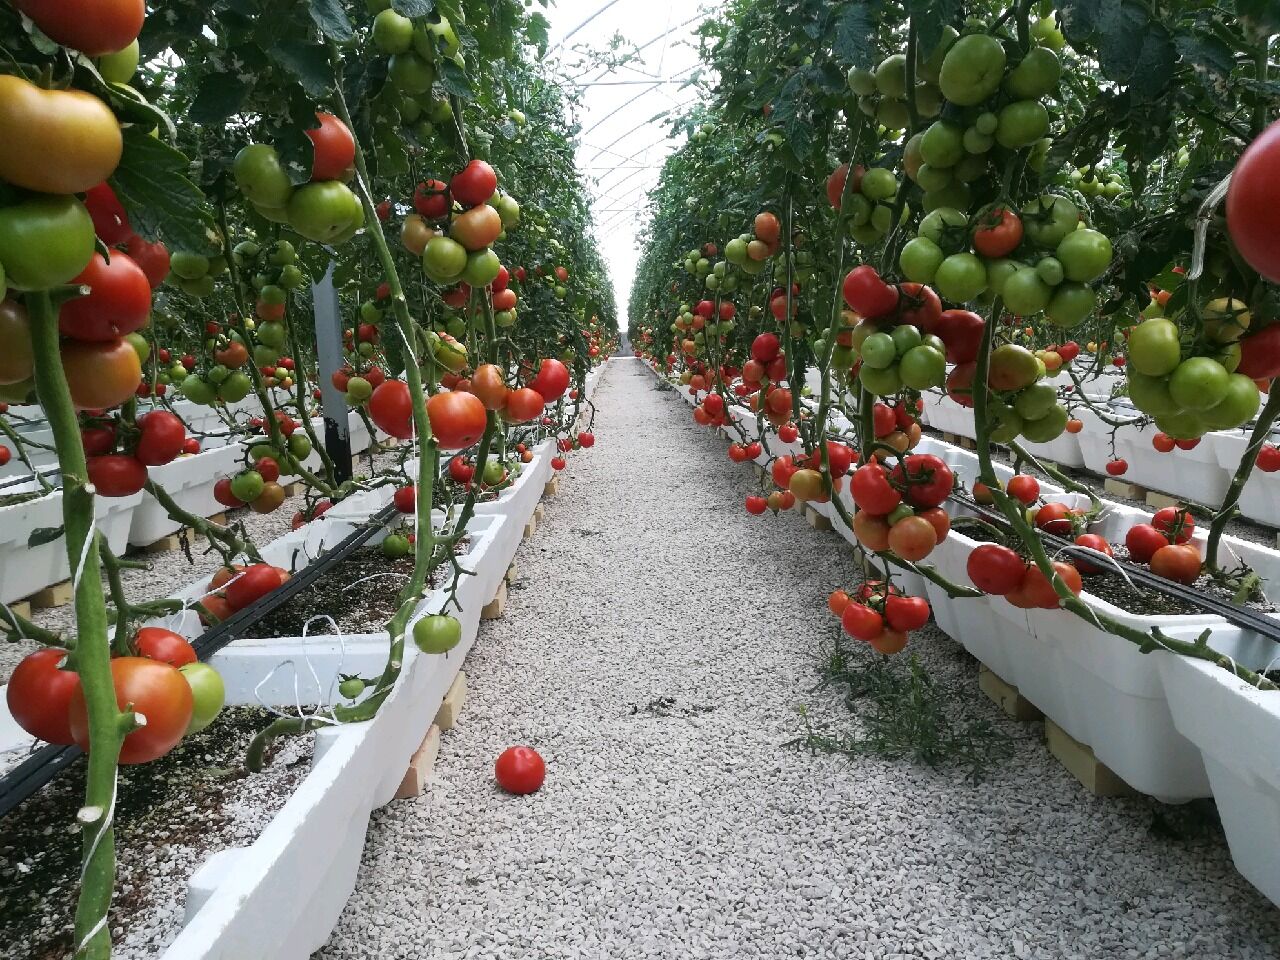 Iran leaps in greenhouse cultivation